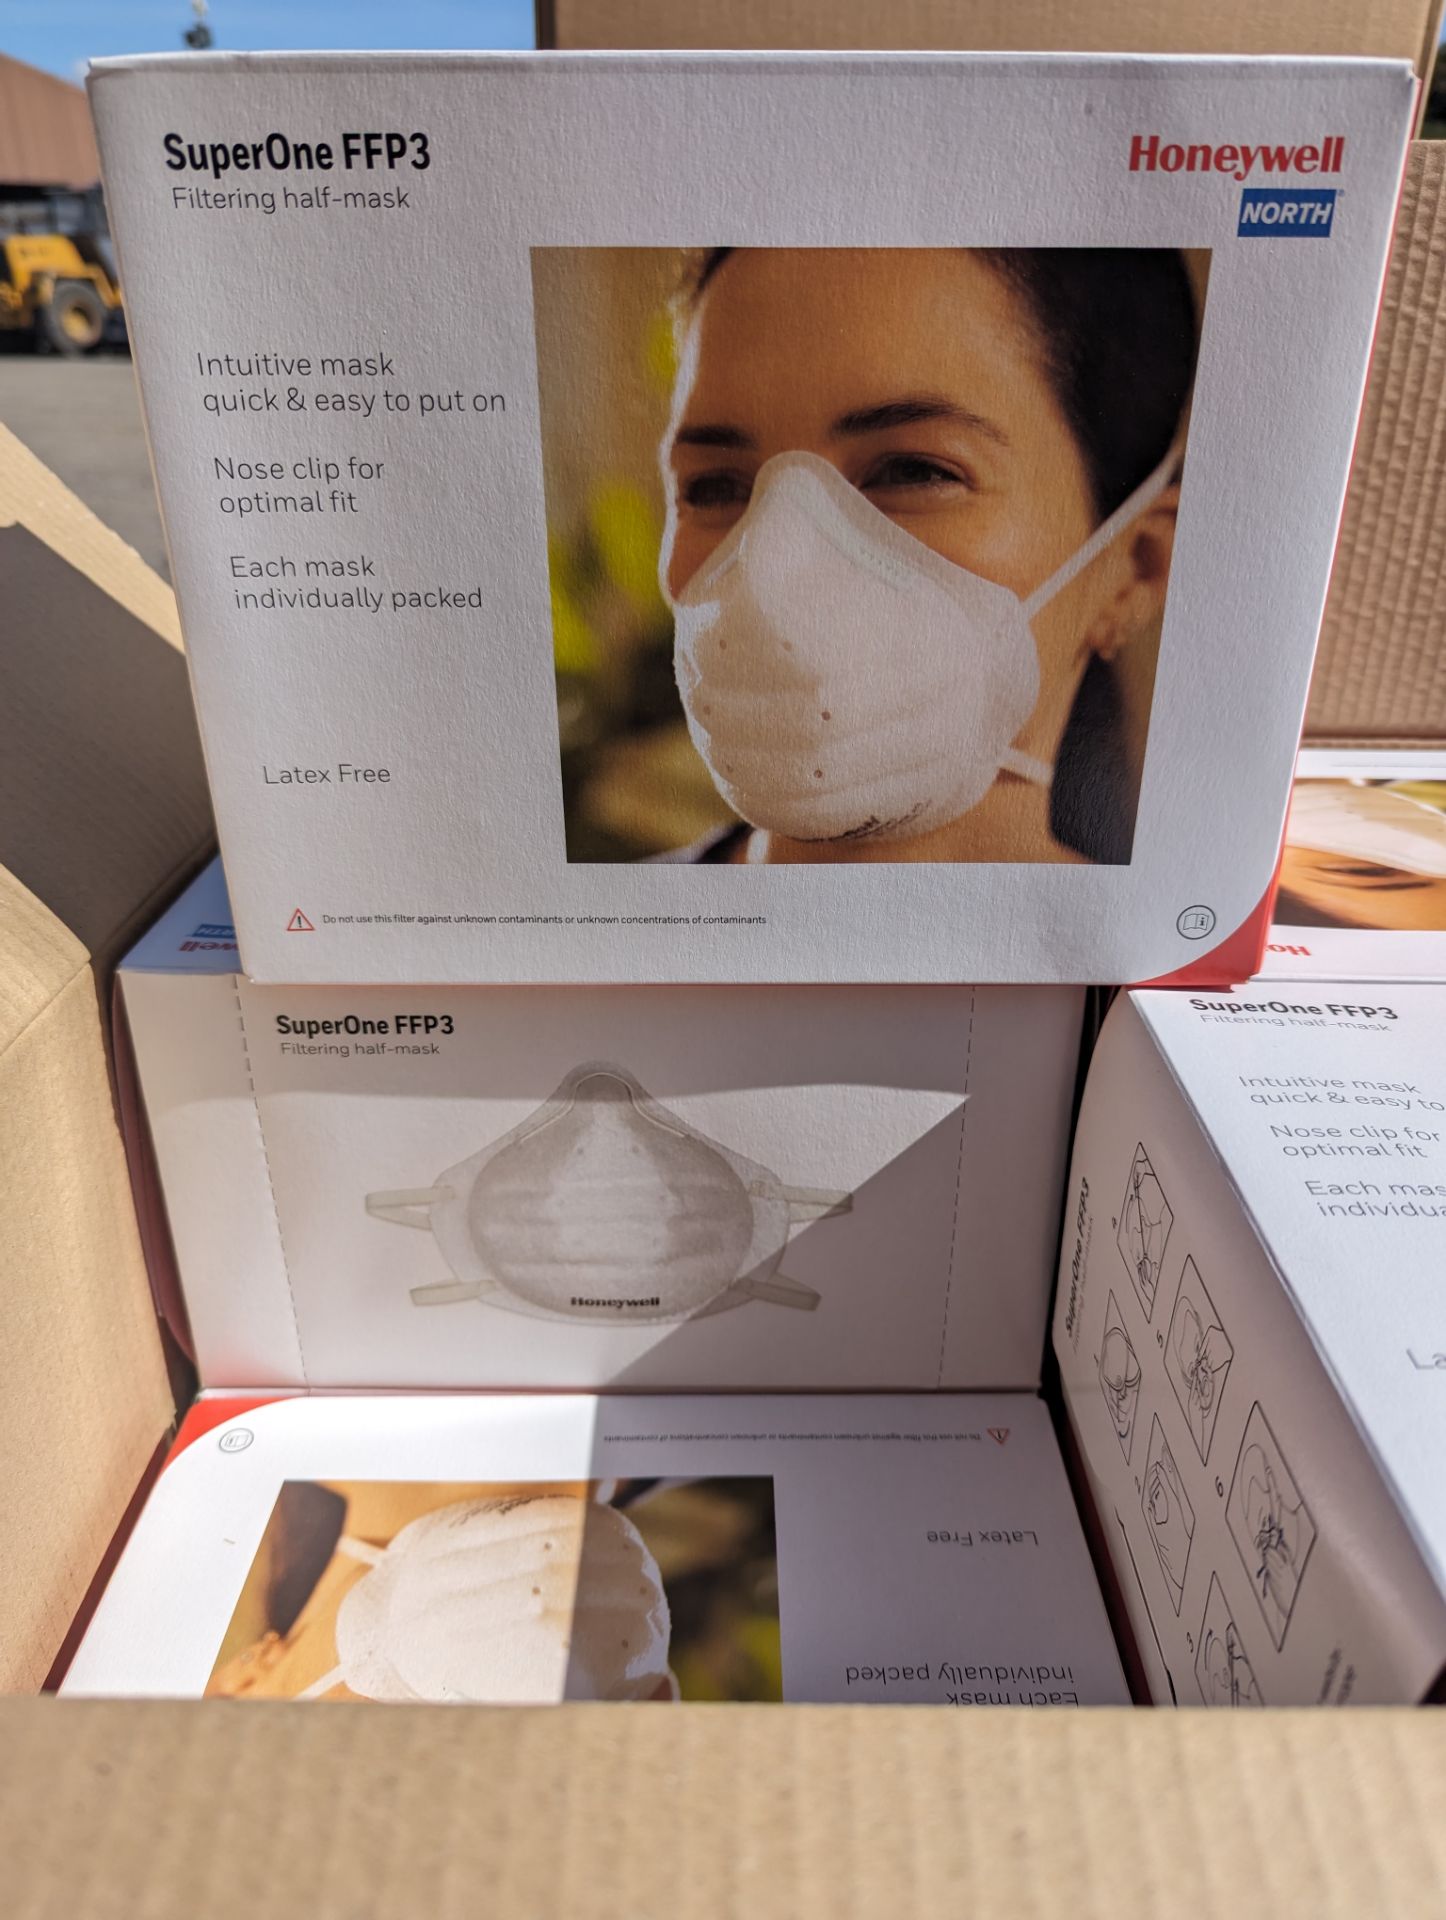 4x Boxes Honeywell SuperOne V2 ip2 FFP3 Half Mask Filter, 12 Packs of 16 Units Each Per Box - Image 5 of 6